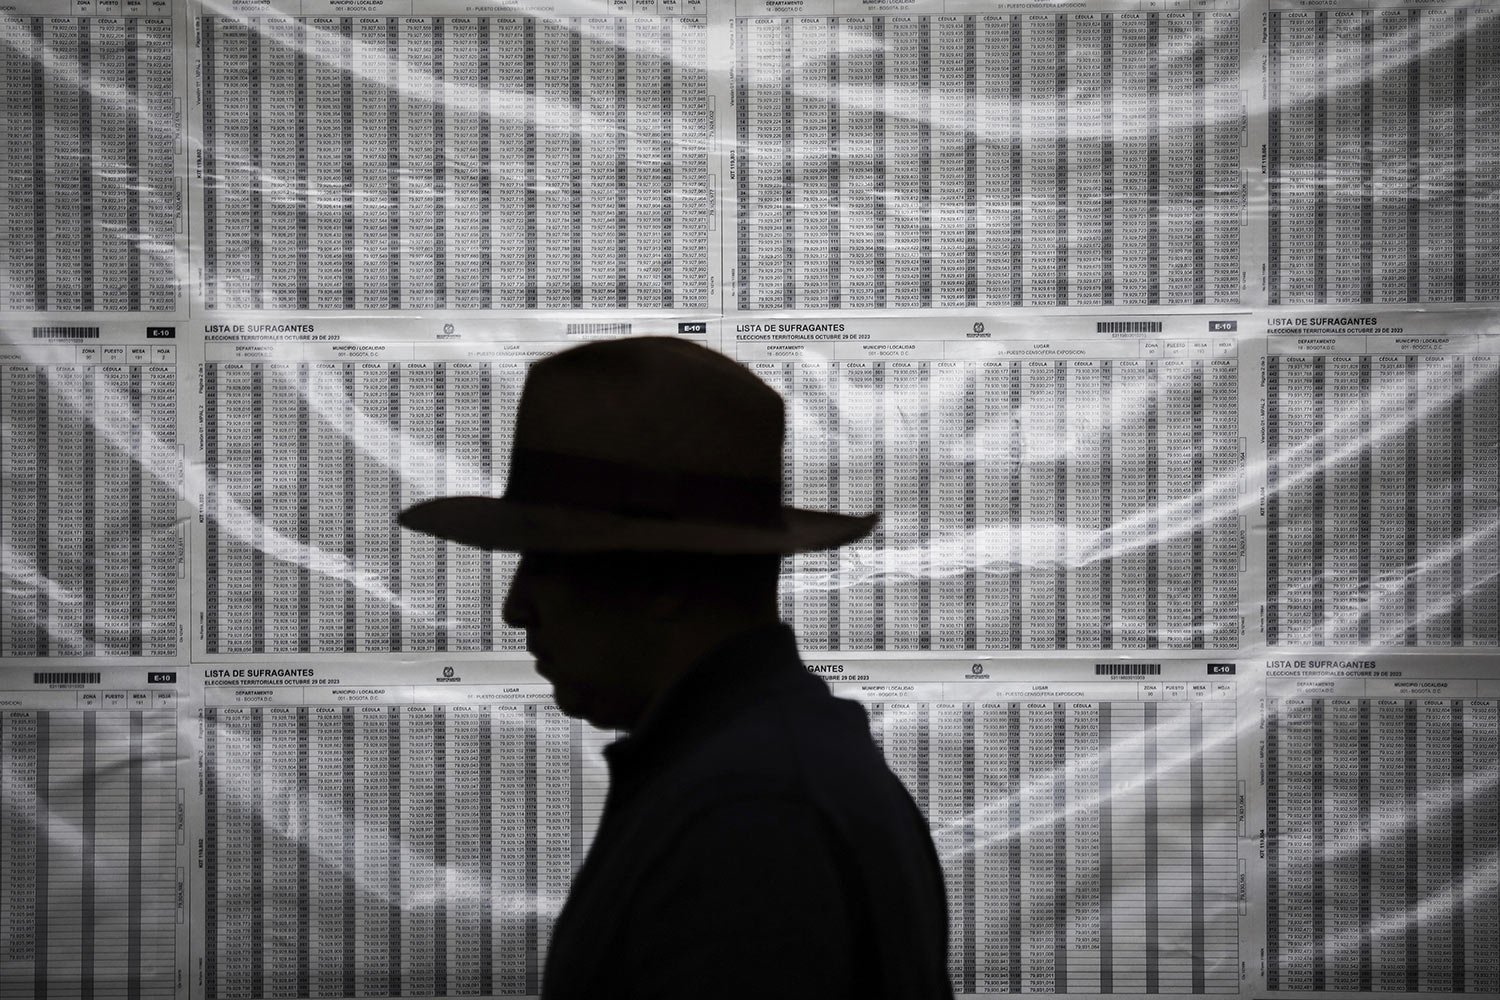  A voter walks past electoral lists during elections in Bogota, Colombia, Oct. 29, 2023. (AP Photo/Ivan Valencia) 